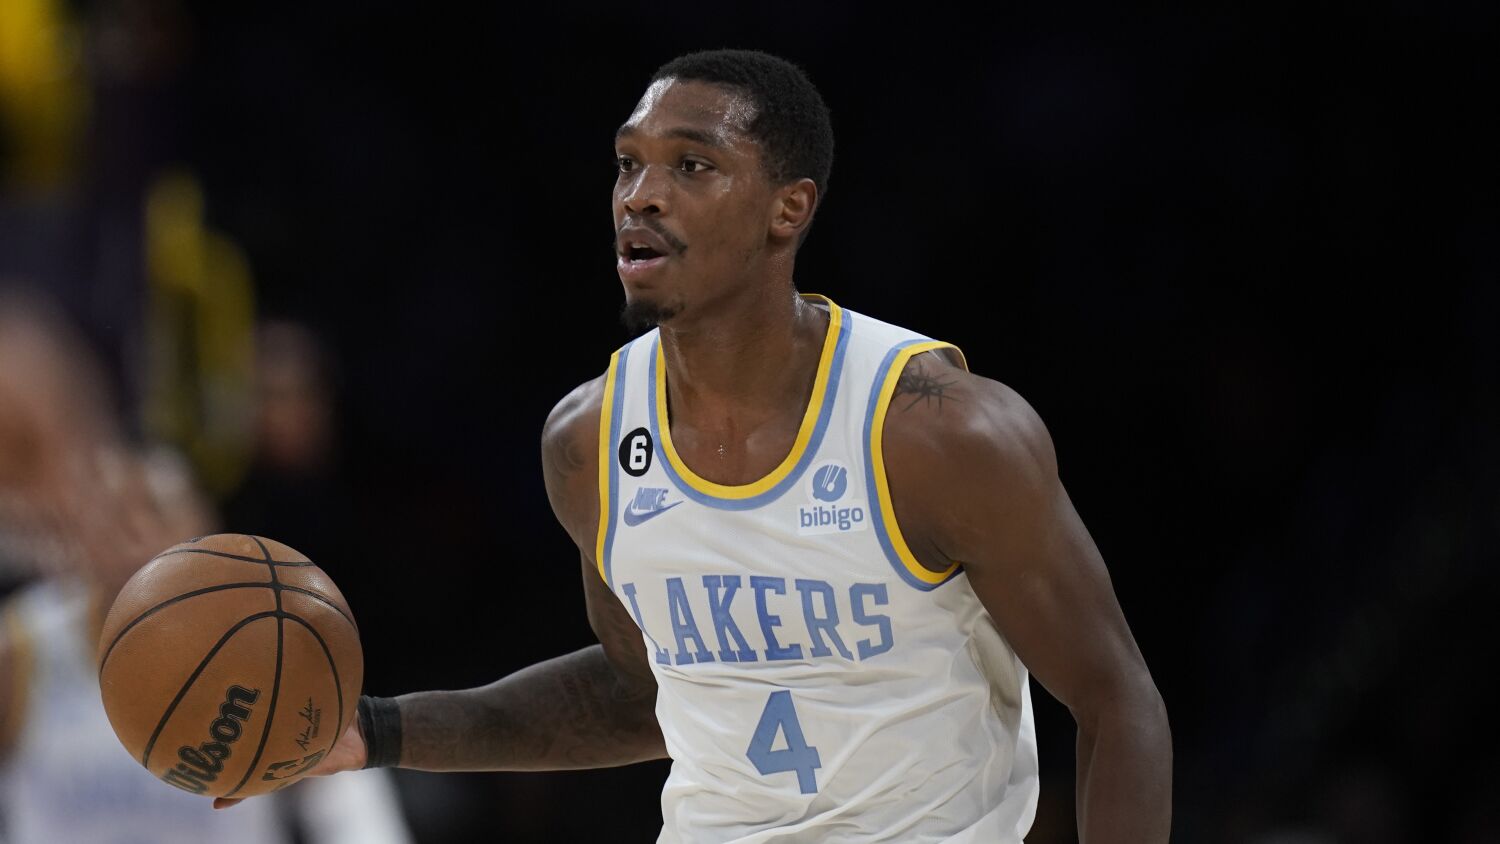 Injuries will sideline Lakers guards Austin Reaves and Lonnie Walker IV indefinitely